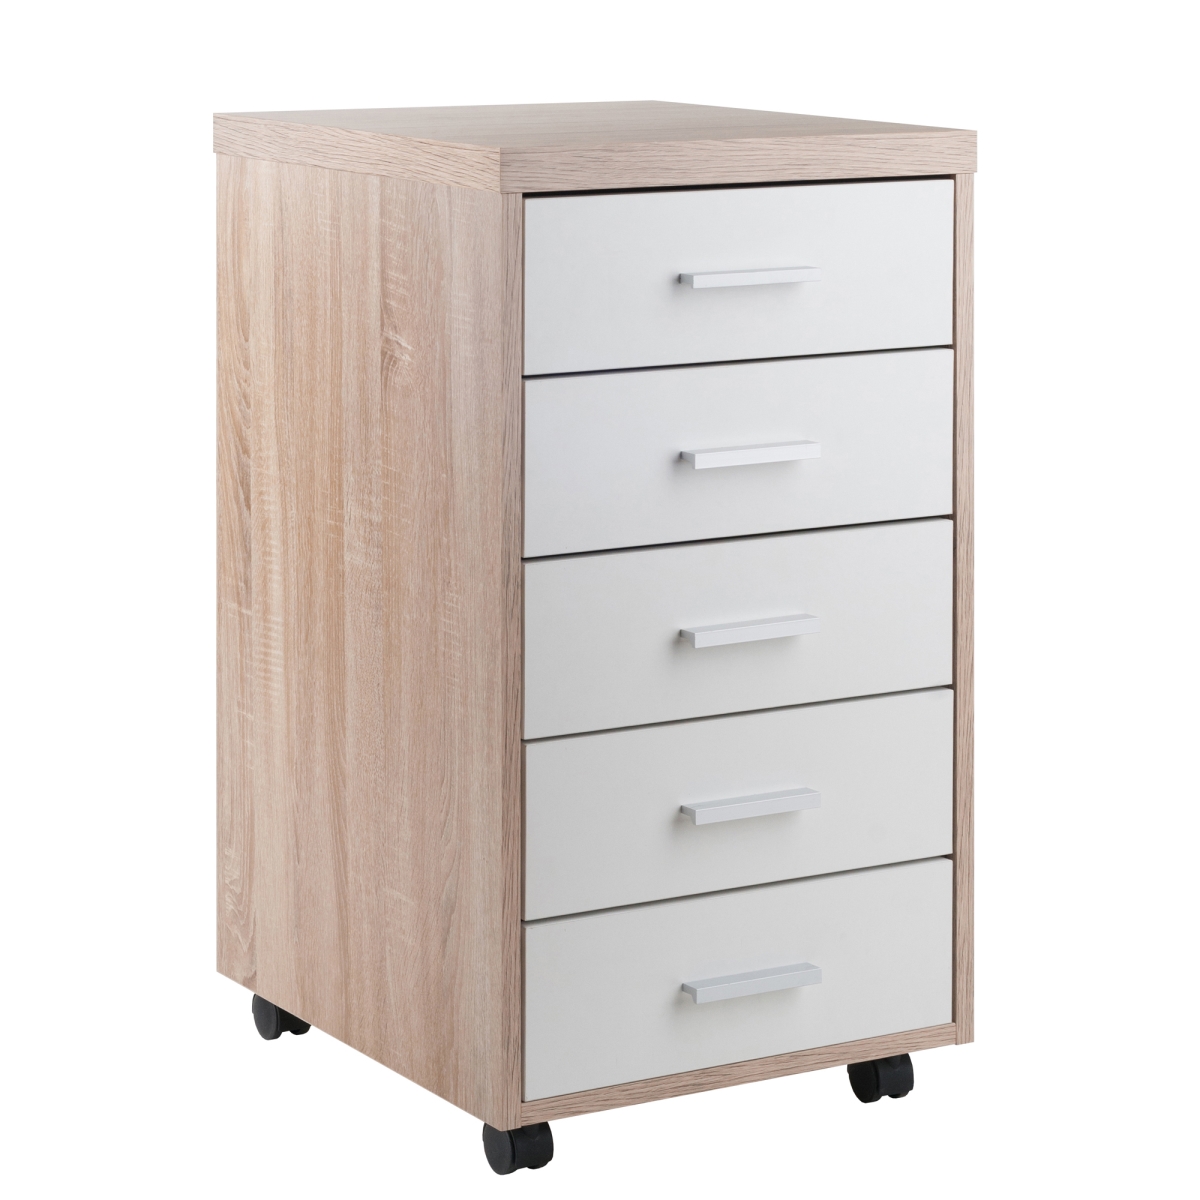 18556 Kenner Mobile Storage Cabinet With 5 Drawers - Reclaimed Wood, White - 15.75 X 18.3 X 29.25 In.